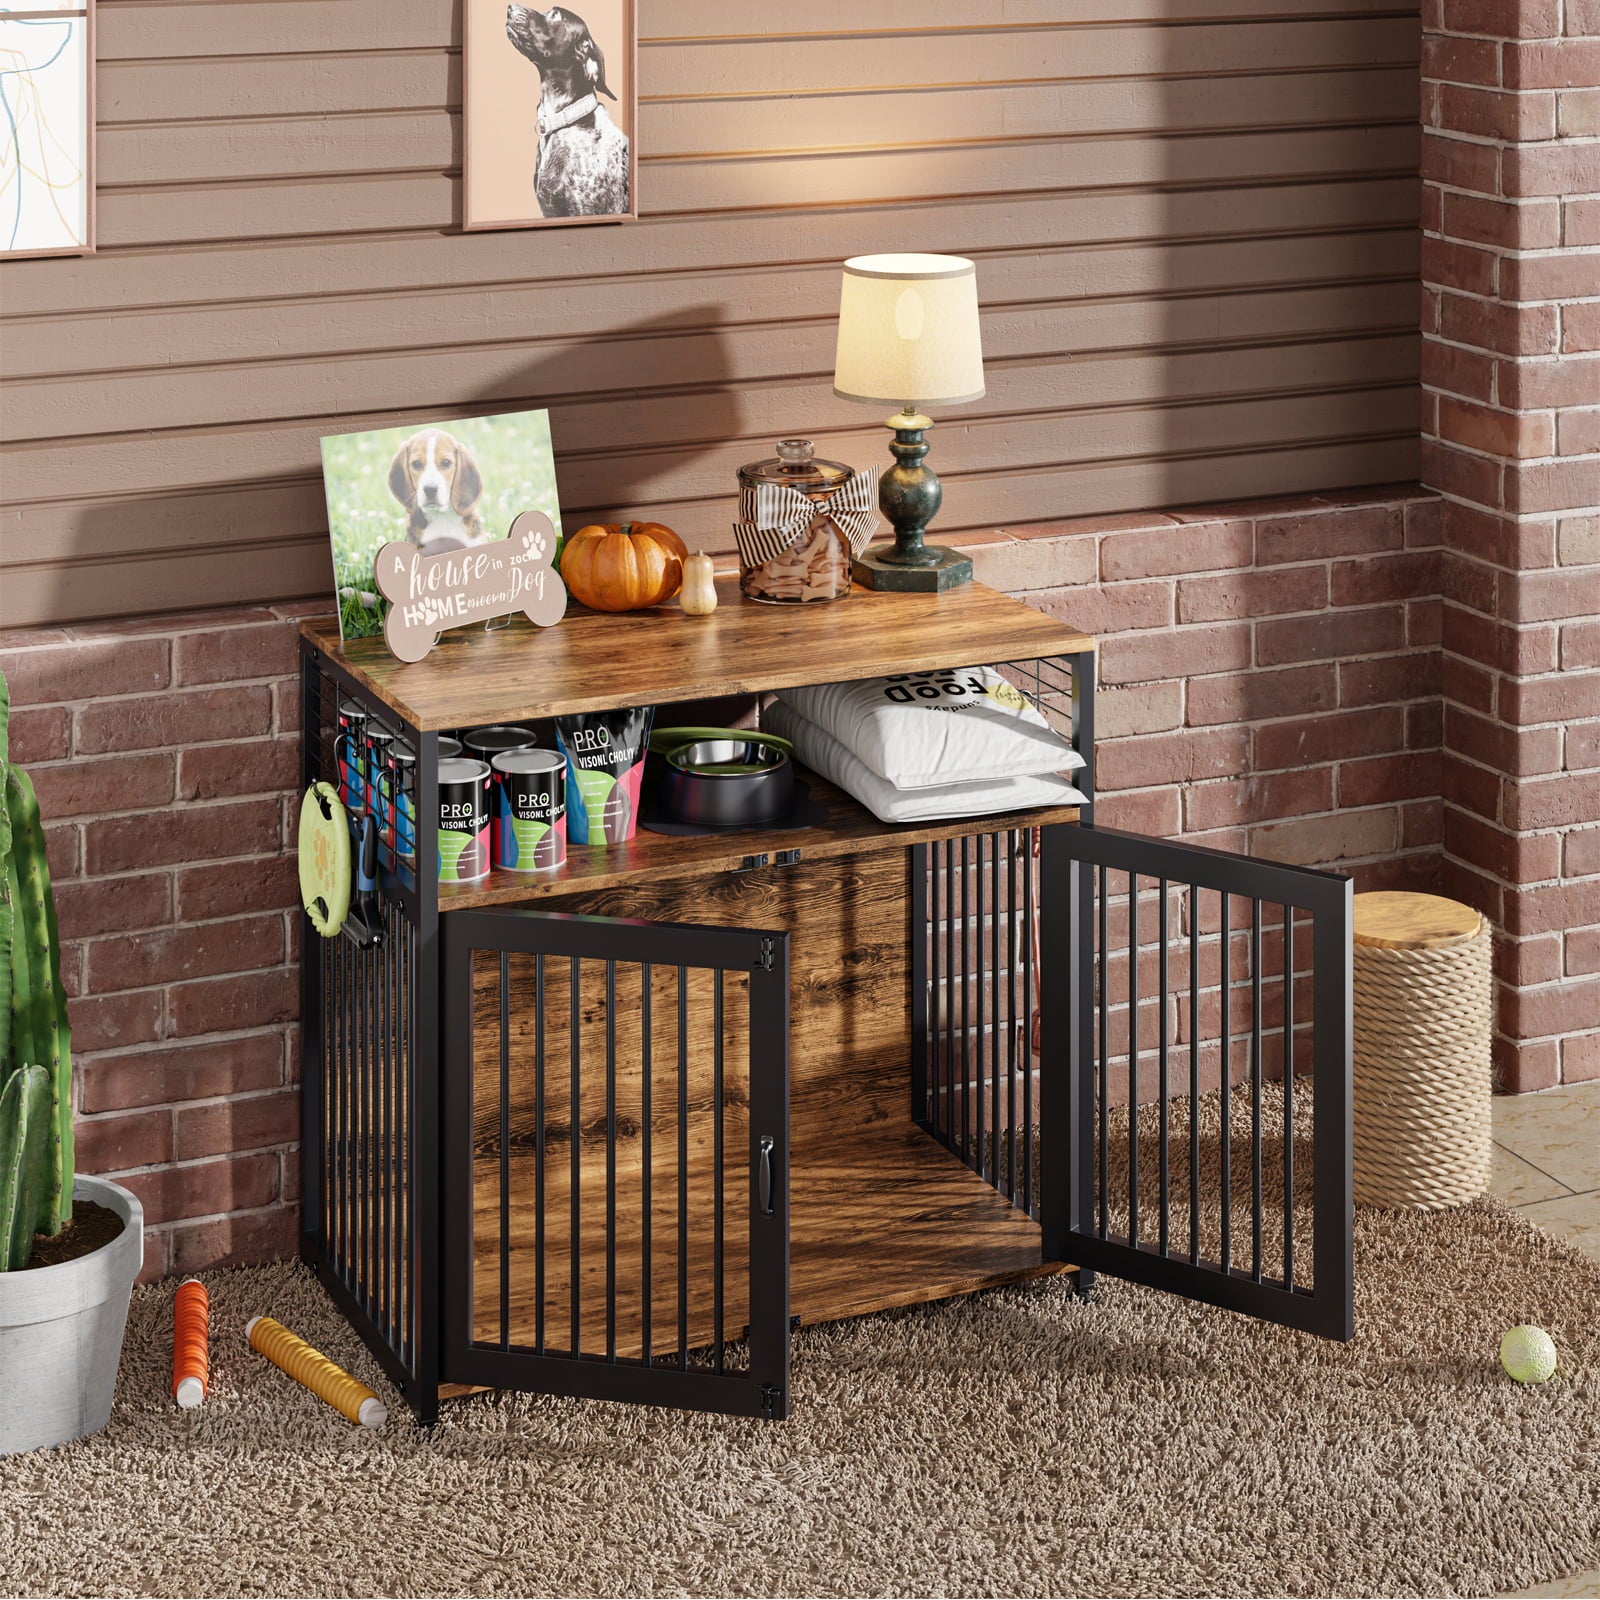 ABORON Wooden Large Dog Crate Furniture， 33/41 InchHeavy Duty Dog Cages for Medium/ Small Dogs Indoor， Super Sturdy Dog Kennel with Storage